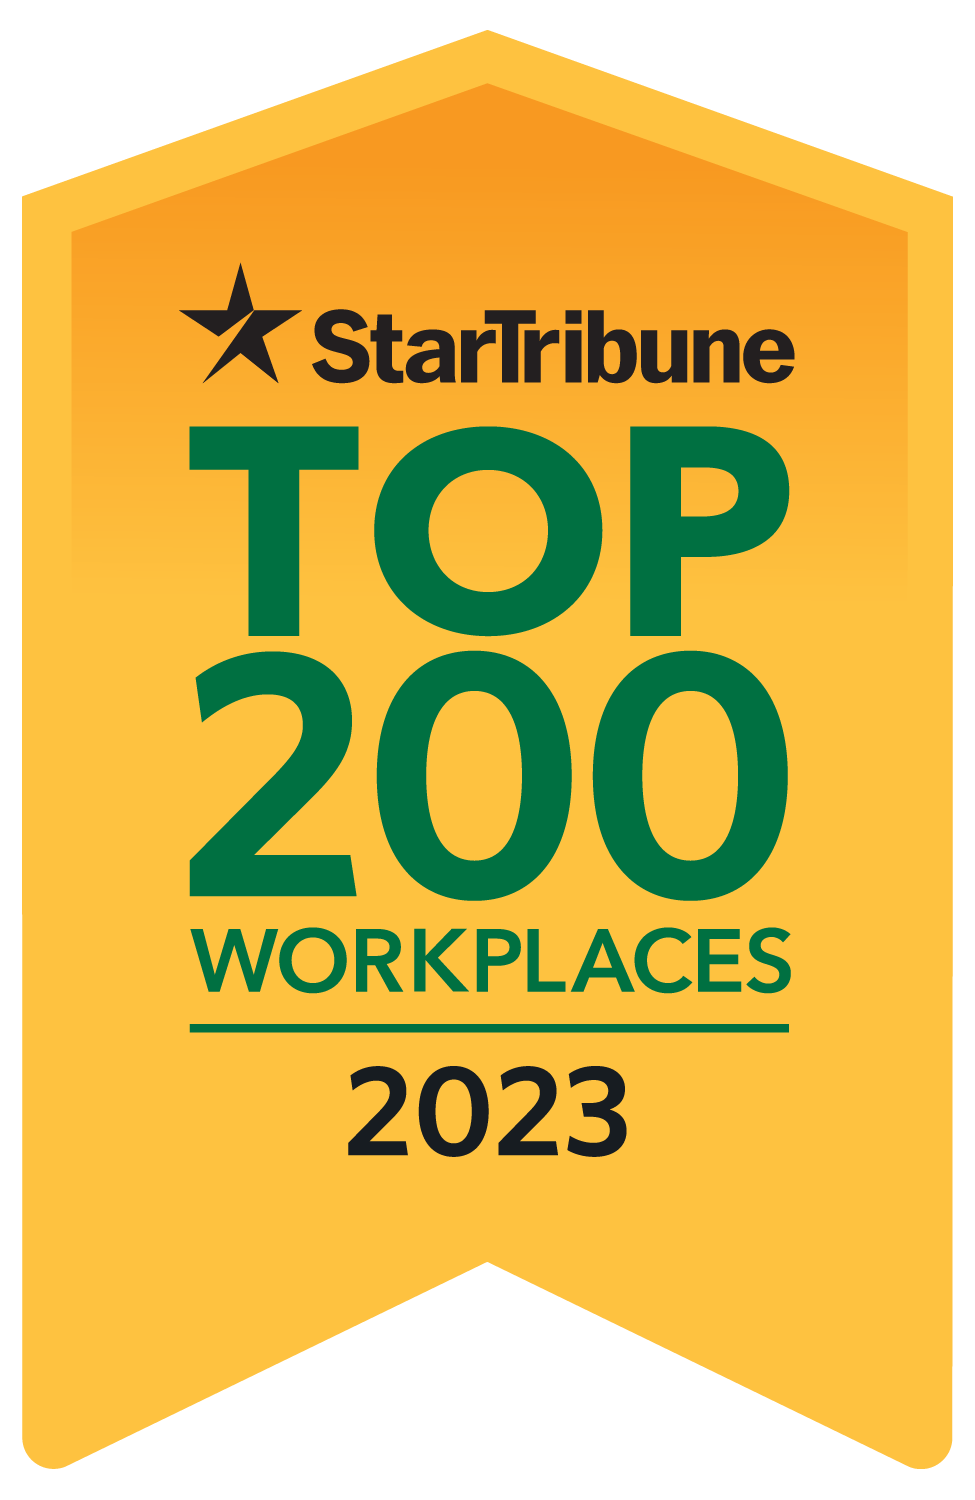 Top 200 Workplaces 2023